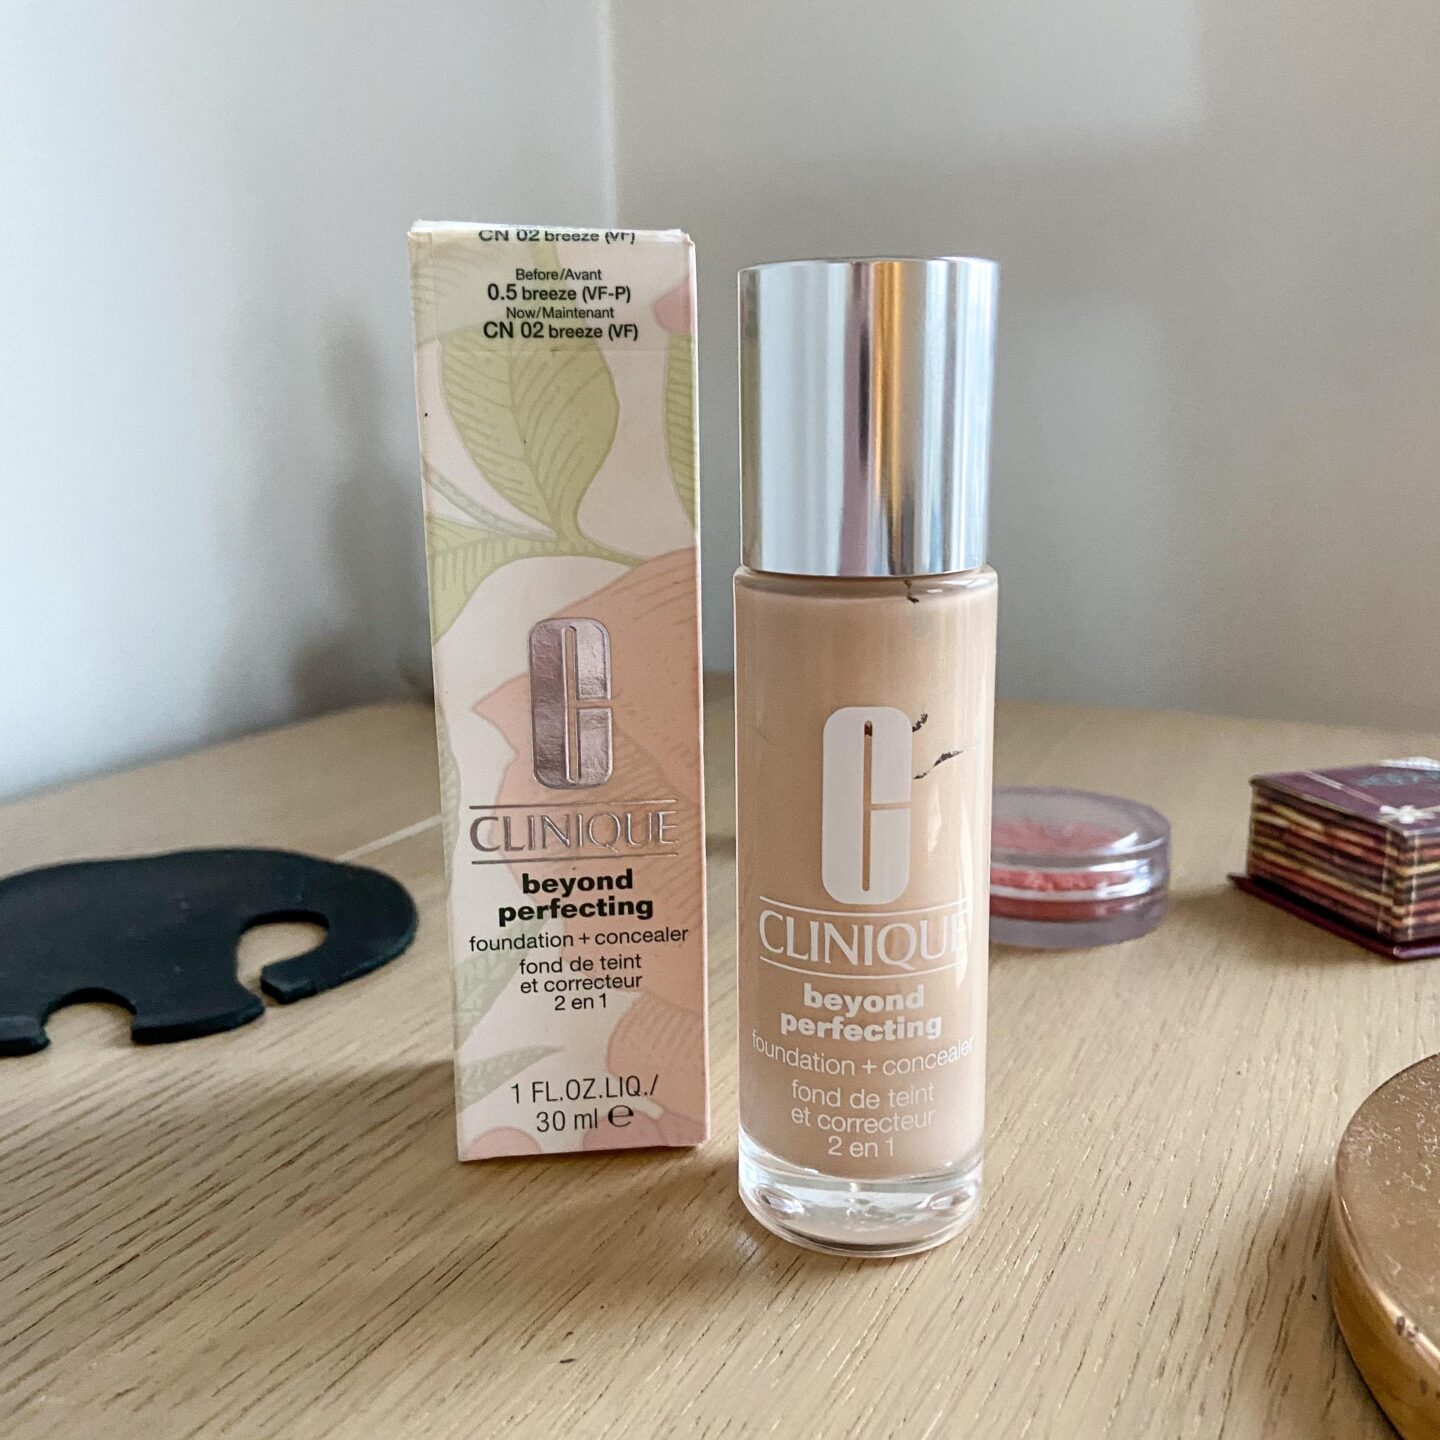 Clinique Beyond Perfecting Foundation + Concealer | Review